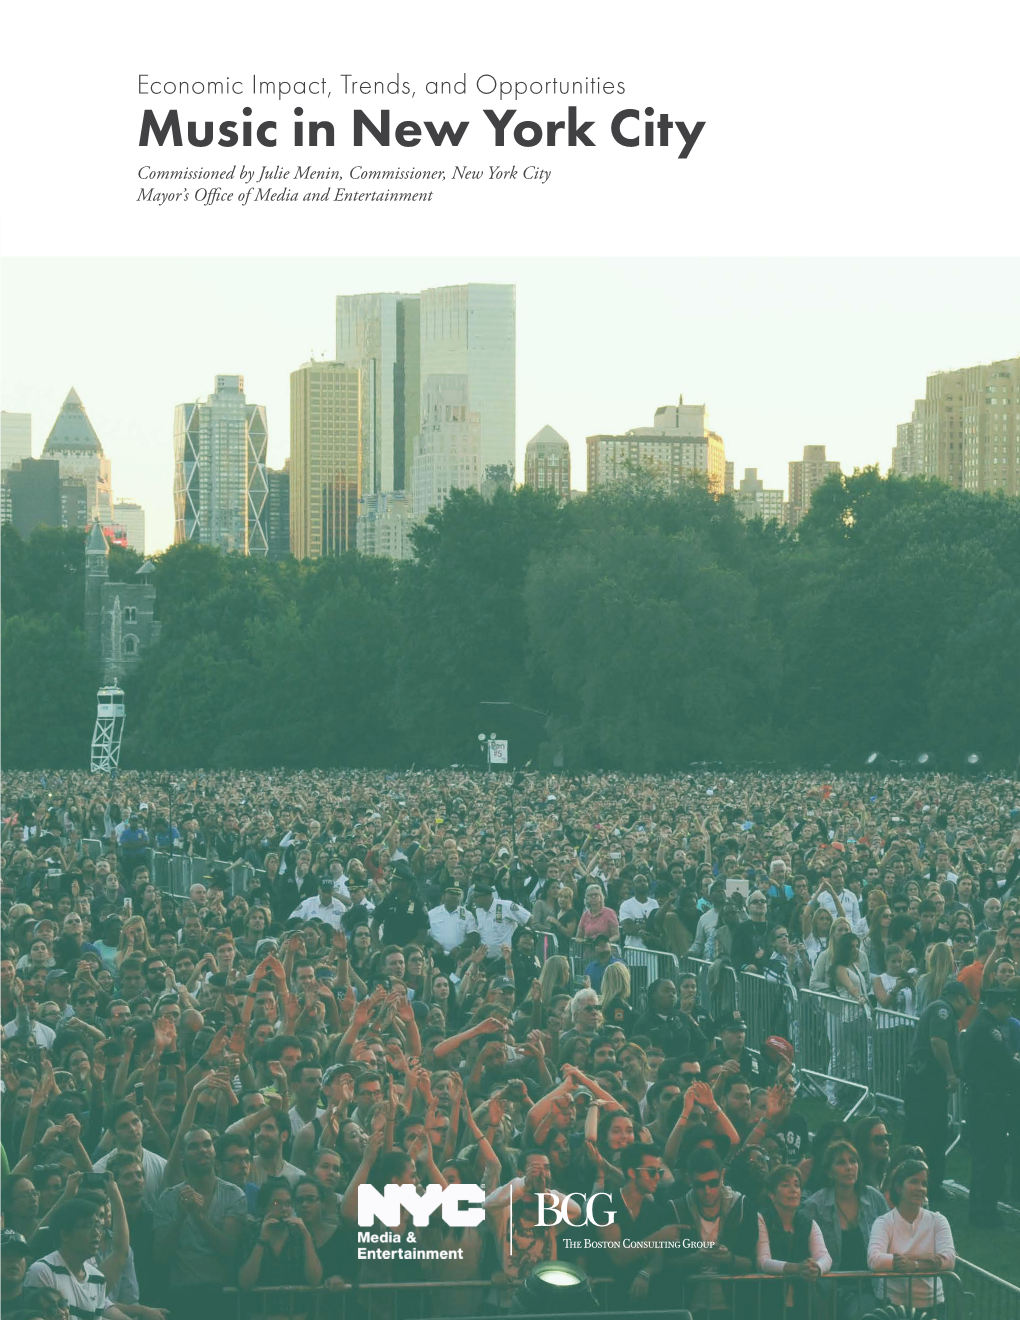 Economic Impact, Trends, and Opportunities: Music in New York City